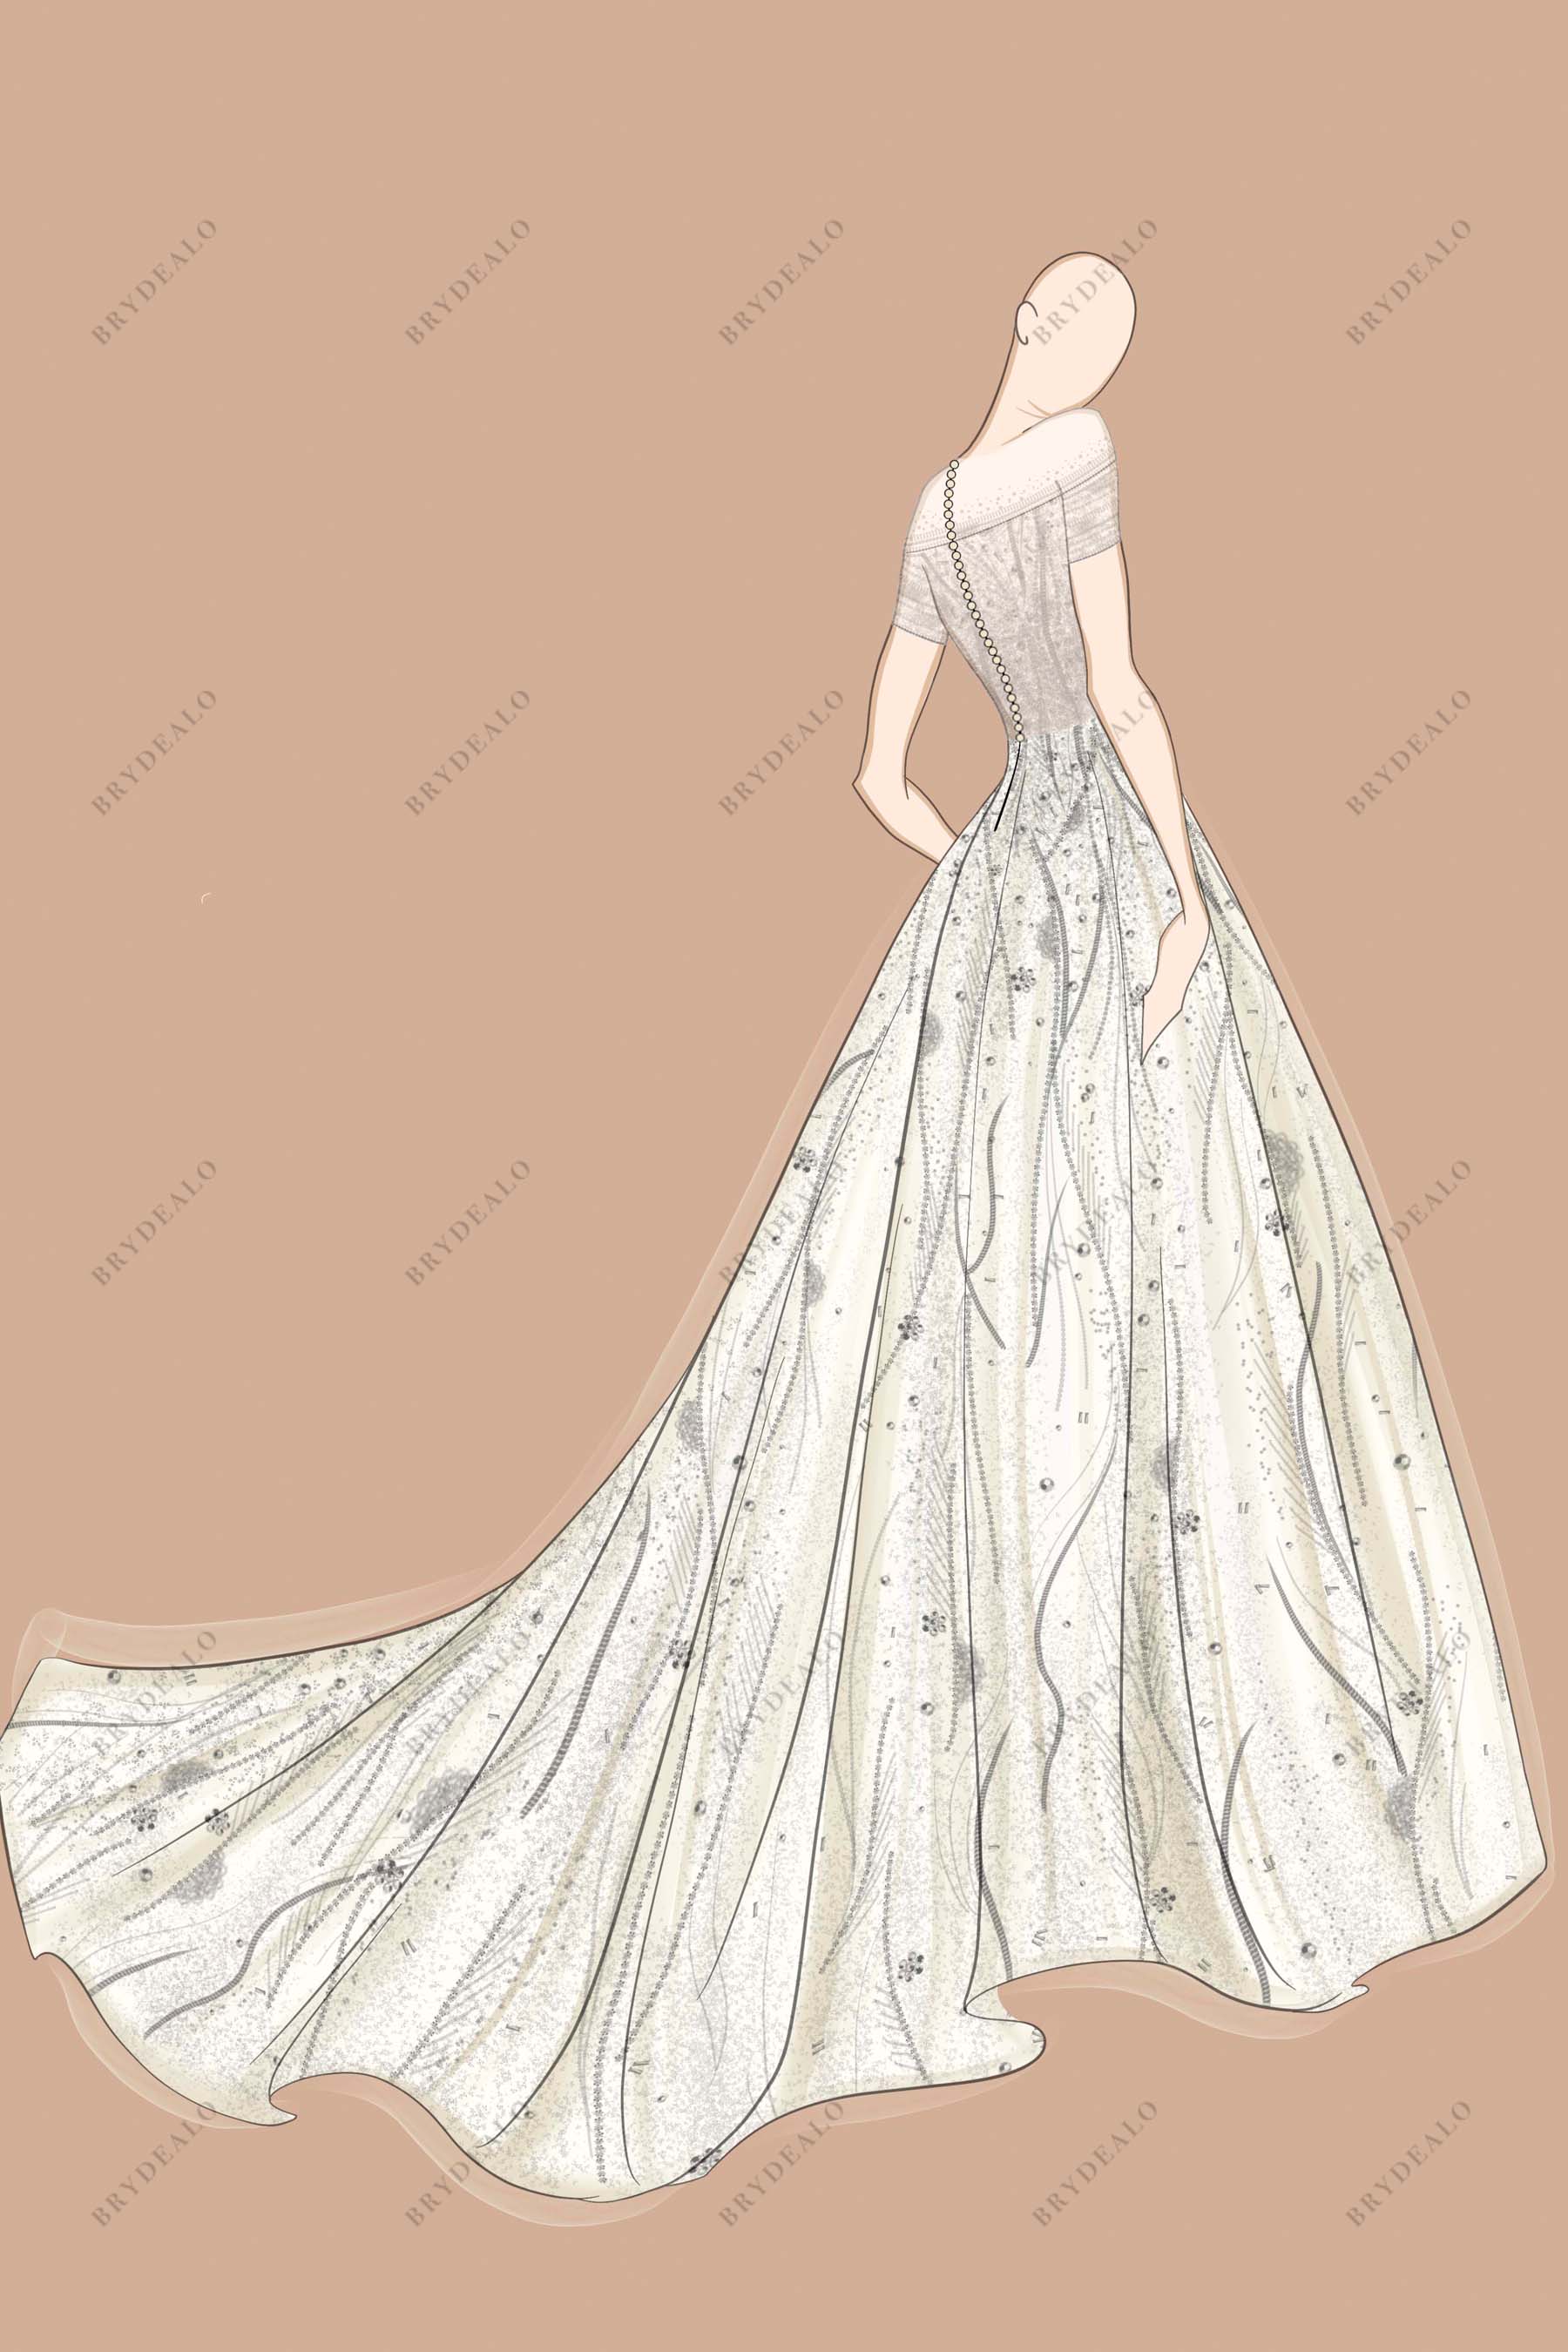 Ball Gown Stock Vector Illustration and Royalty Free Ball Gown Clipart